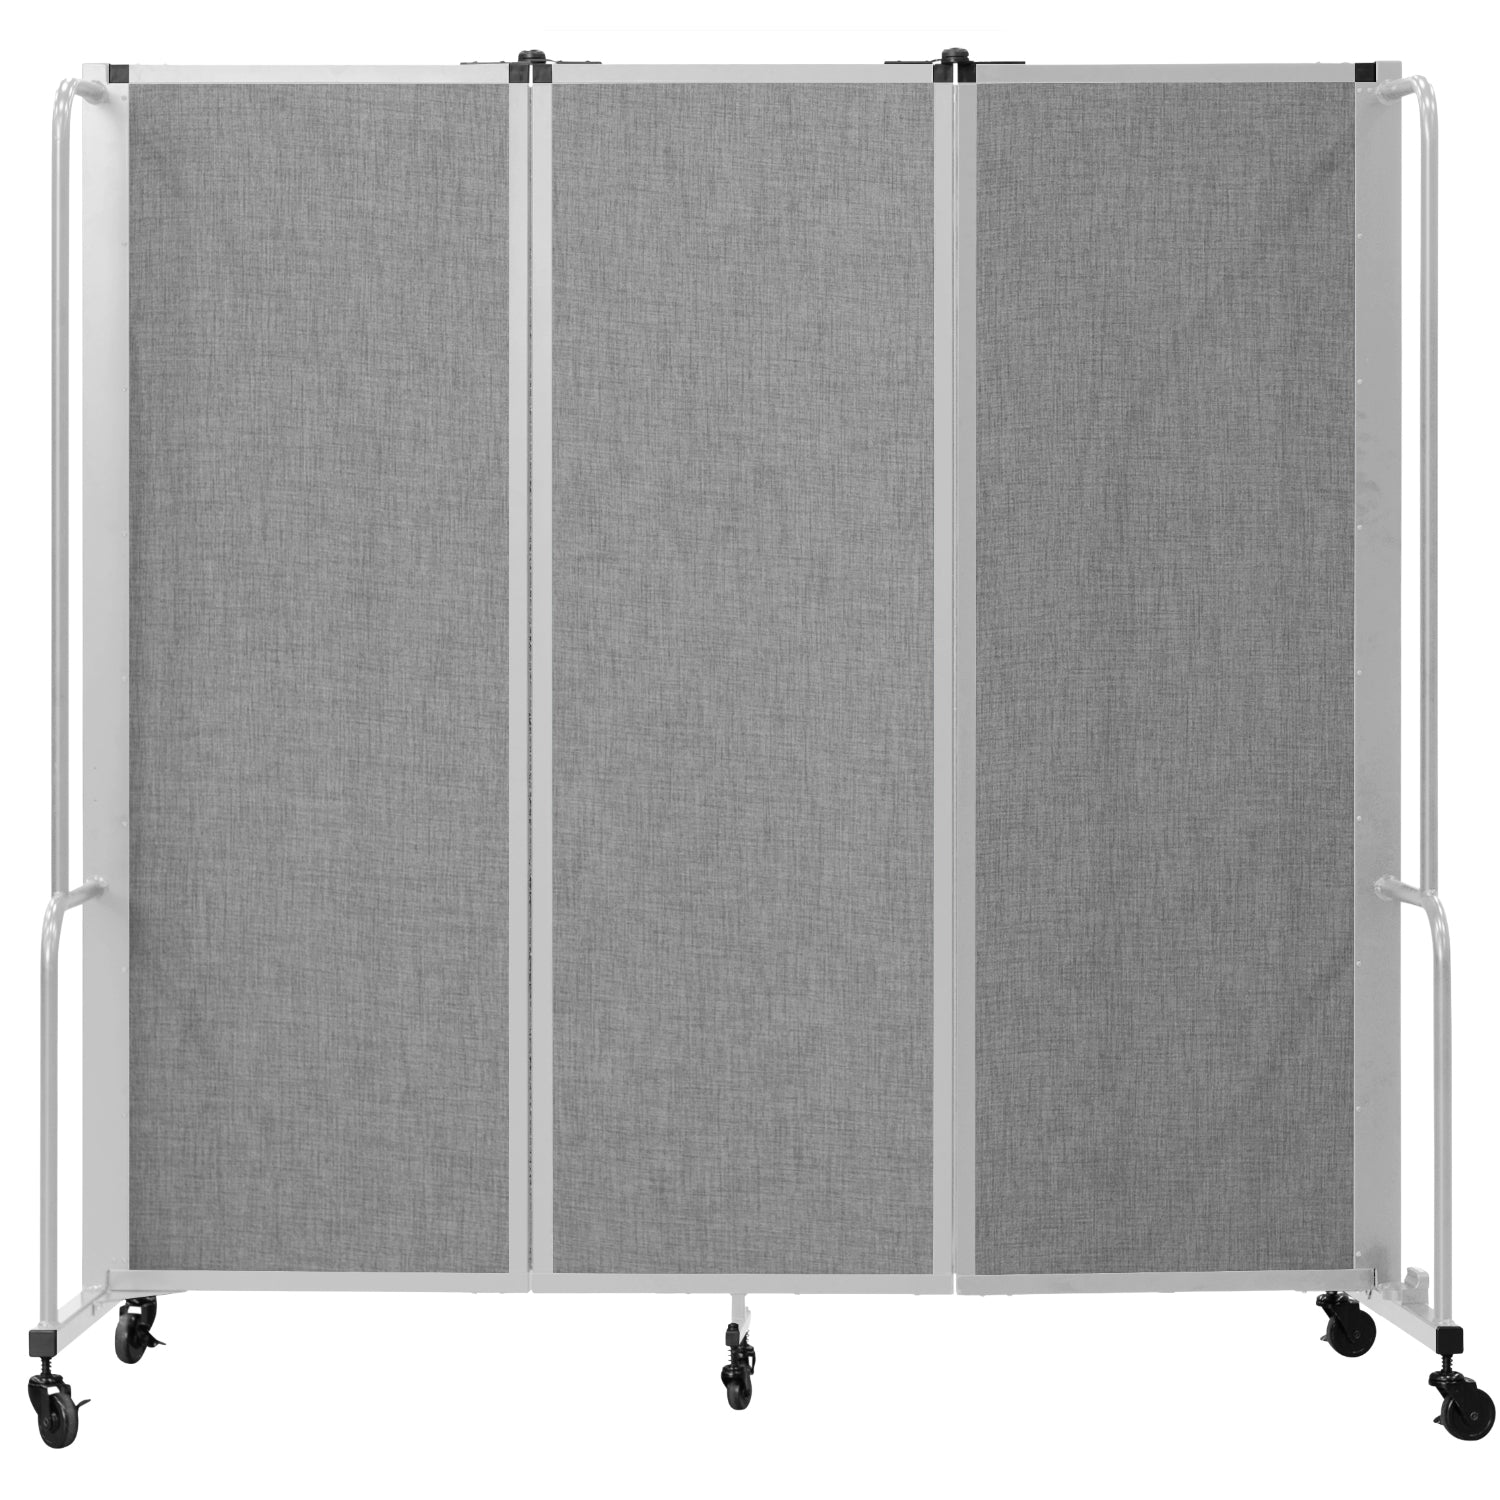 Robo Room Divider with PET Tackable Panels, Grey Frame, 6' Height, 3 Sections